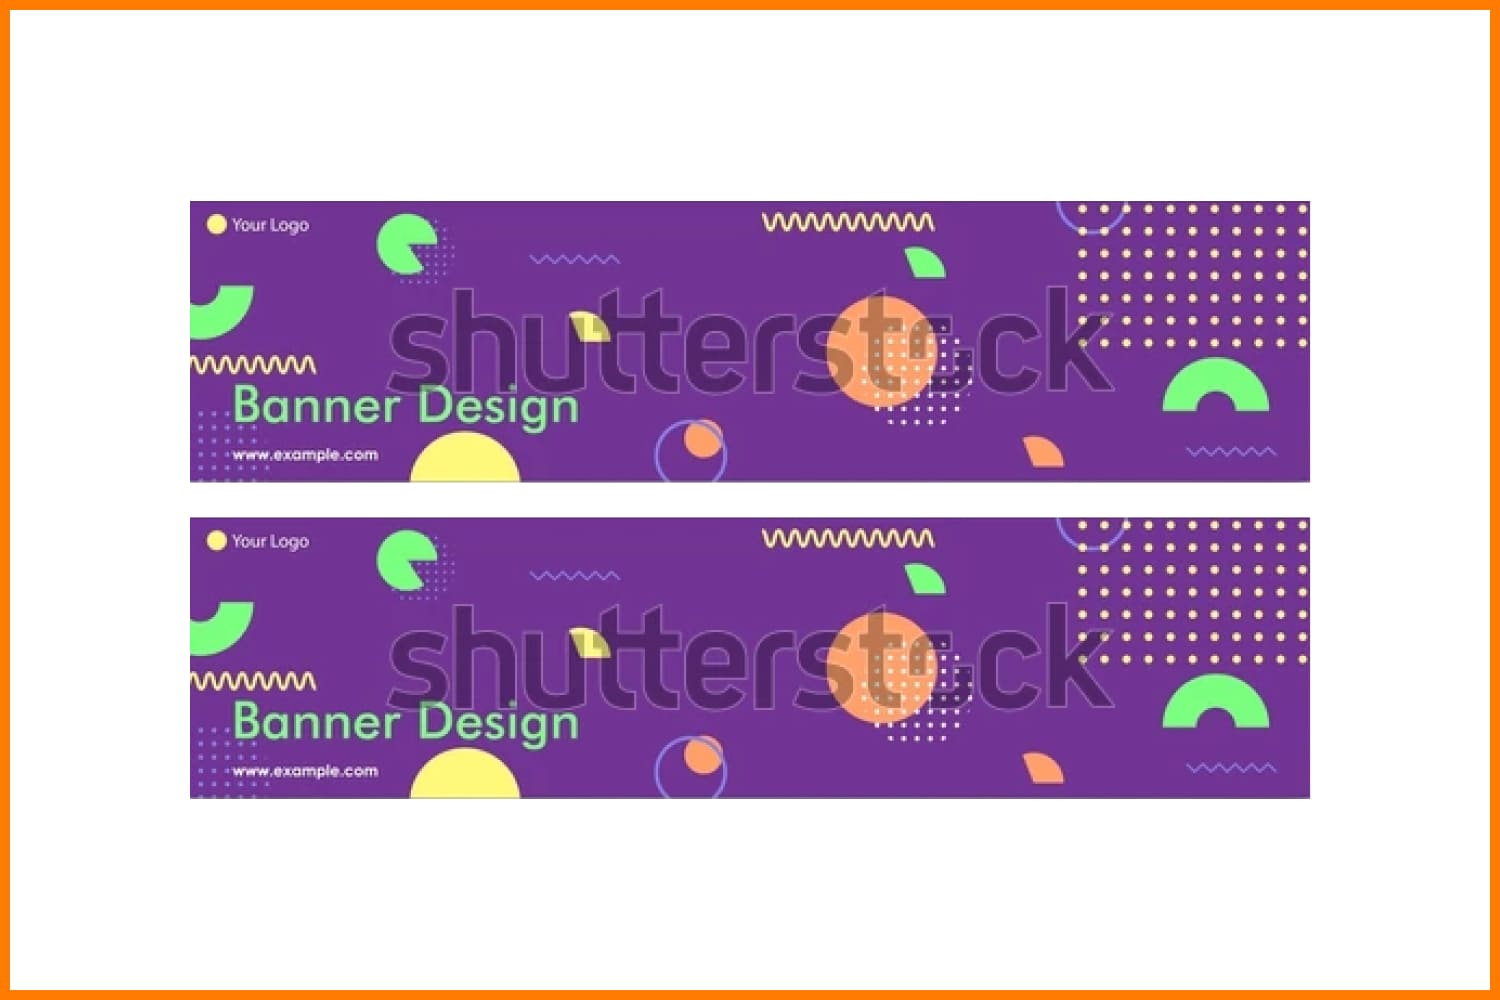 Linkedin banners with purple background and geometric shapes.